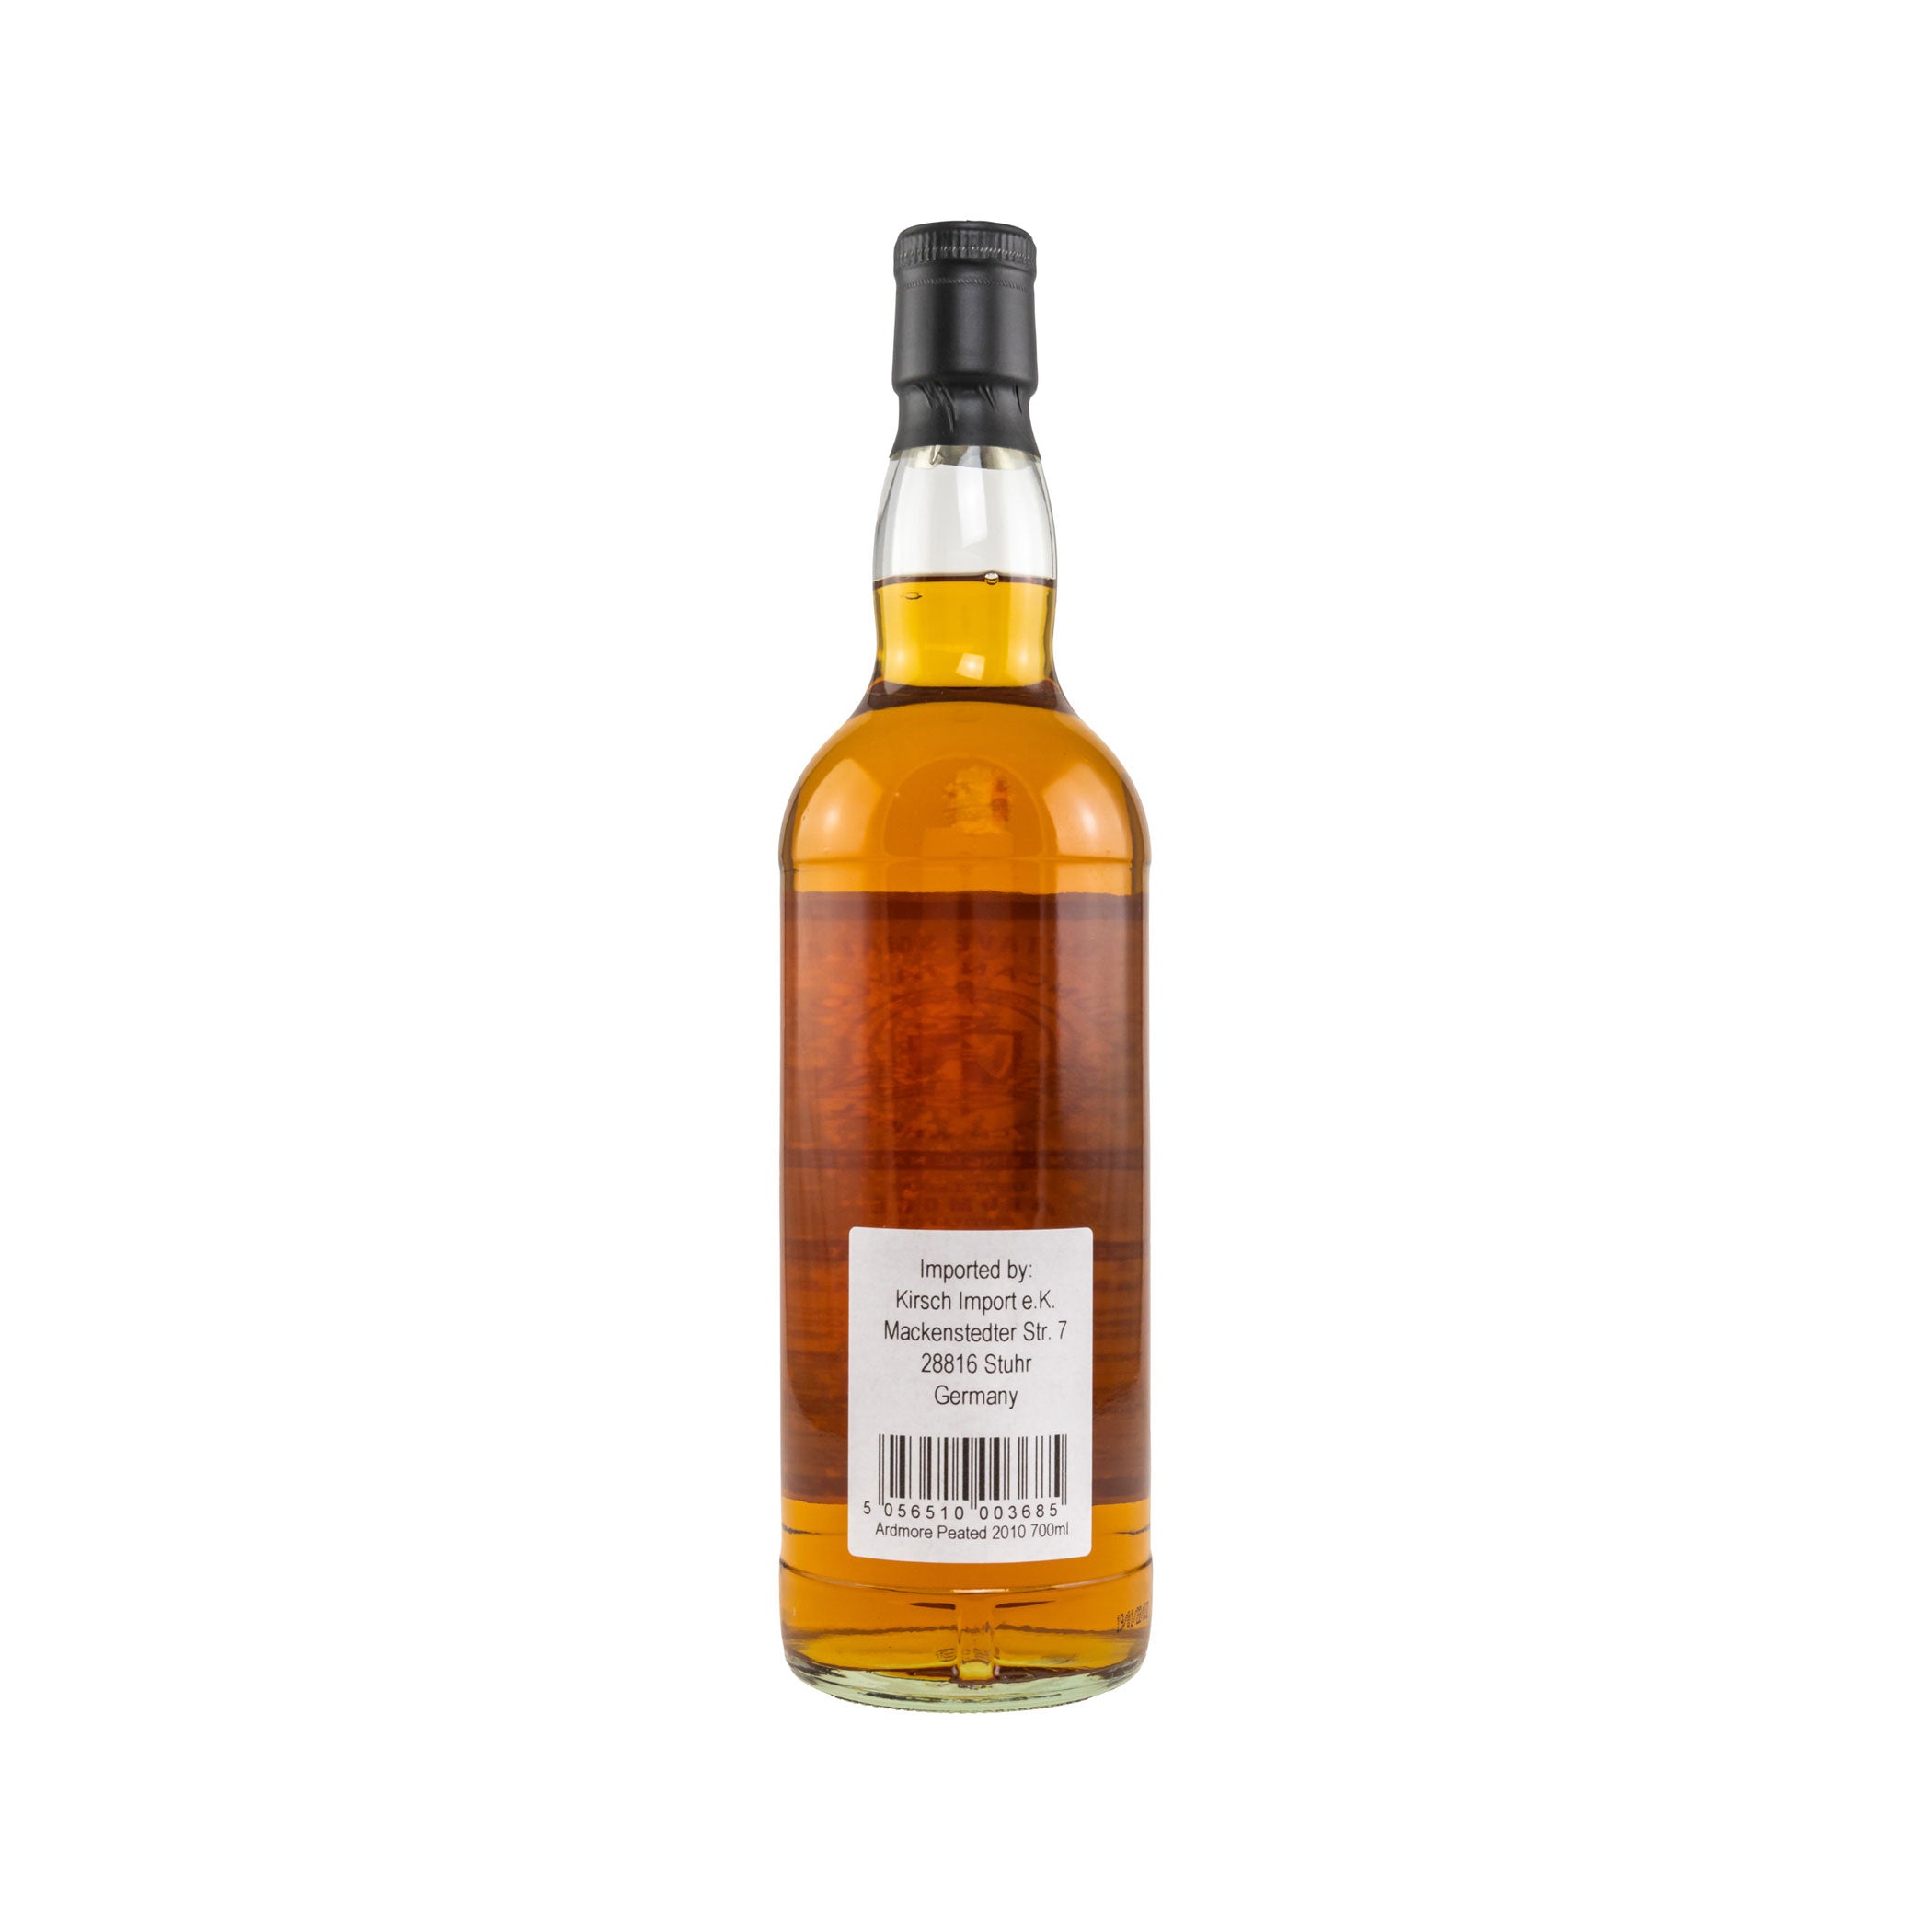 Ardmore 2010/2022 - 11 Jahre - #1932526 - Octave Small Batch (Duncan Taylor)